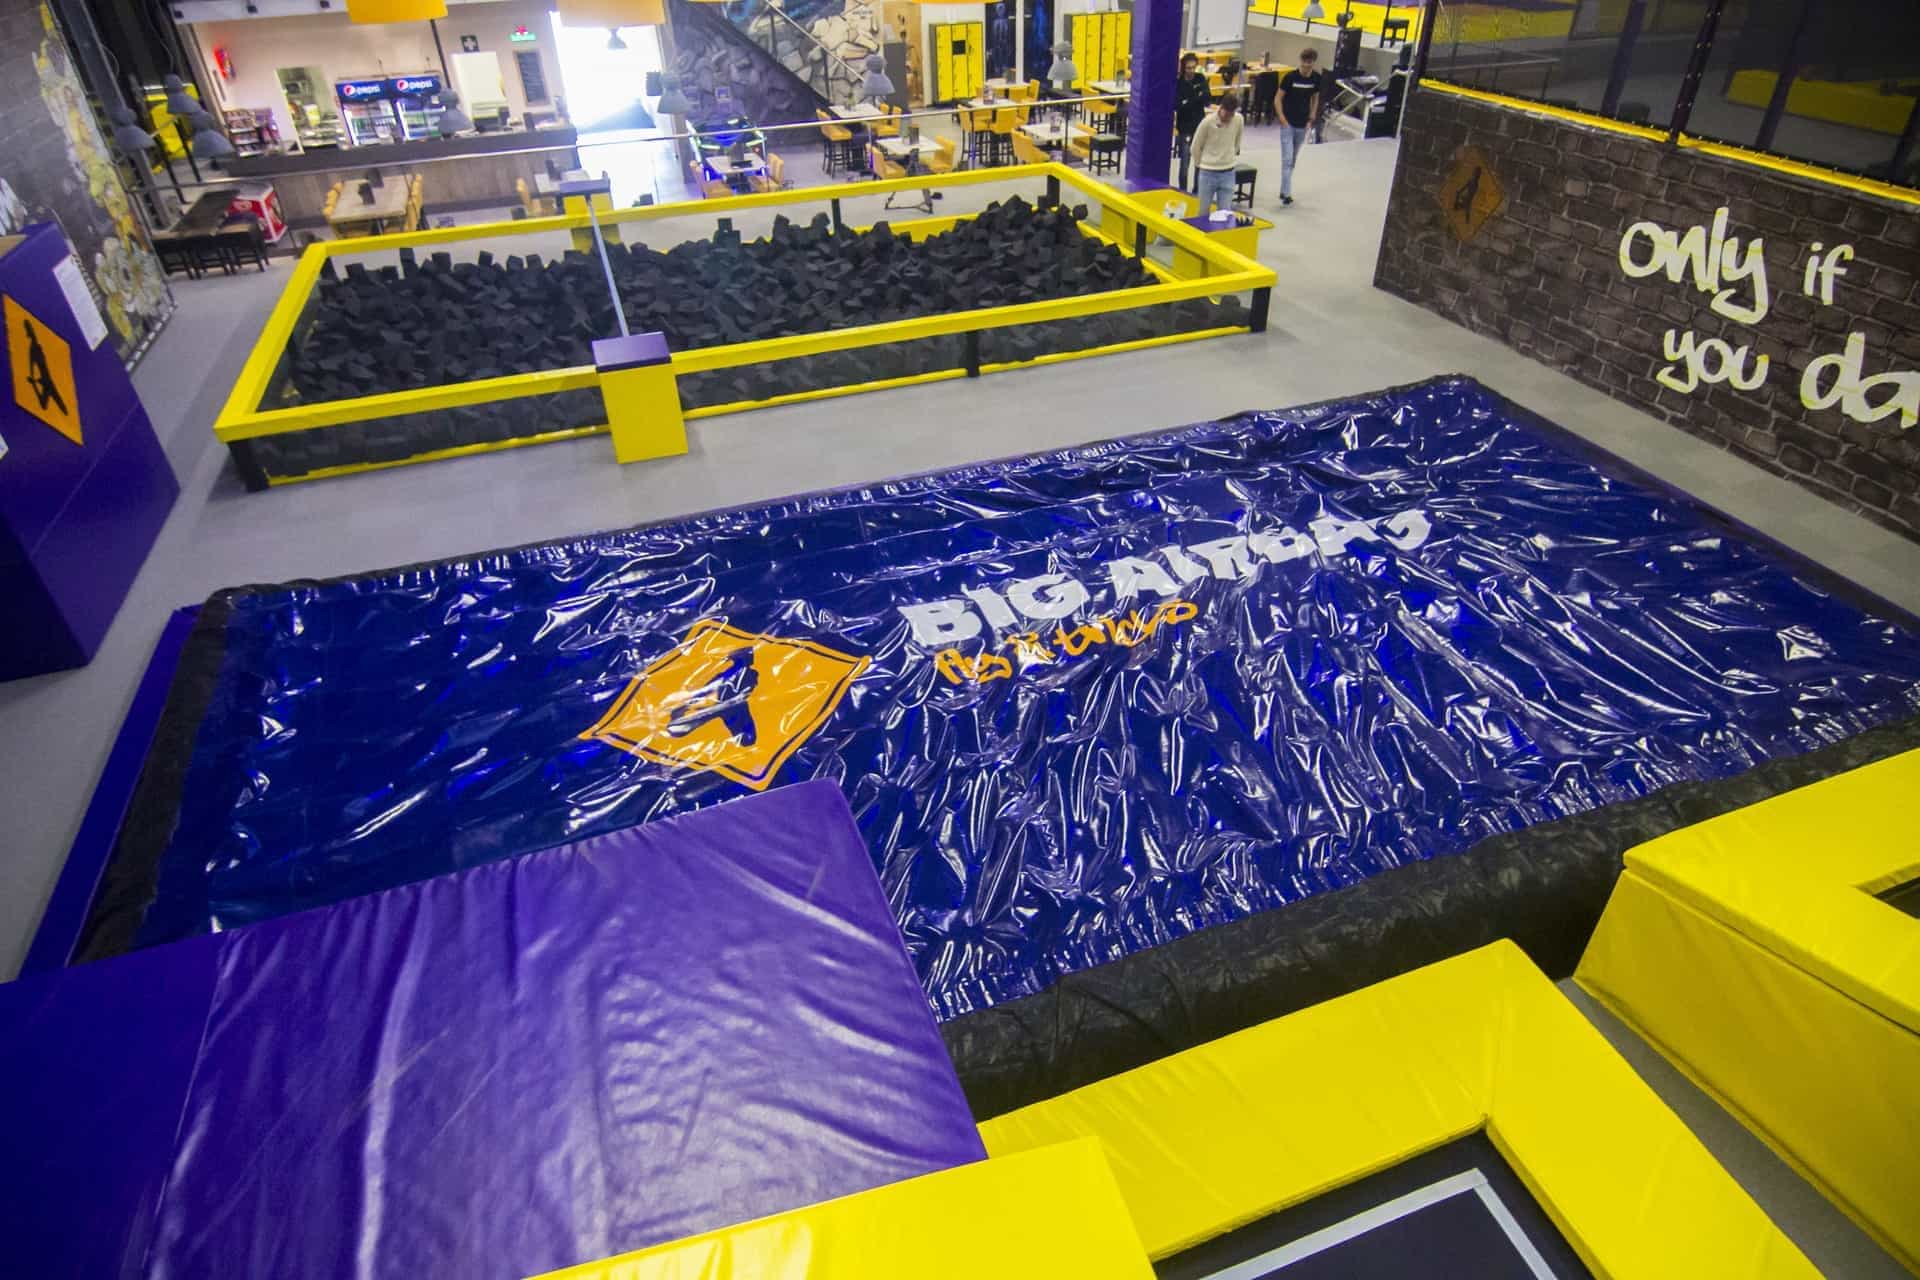 Foam Pit AirBag at trampoline parks across the world BigAirBag®